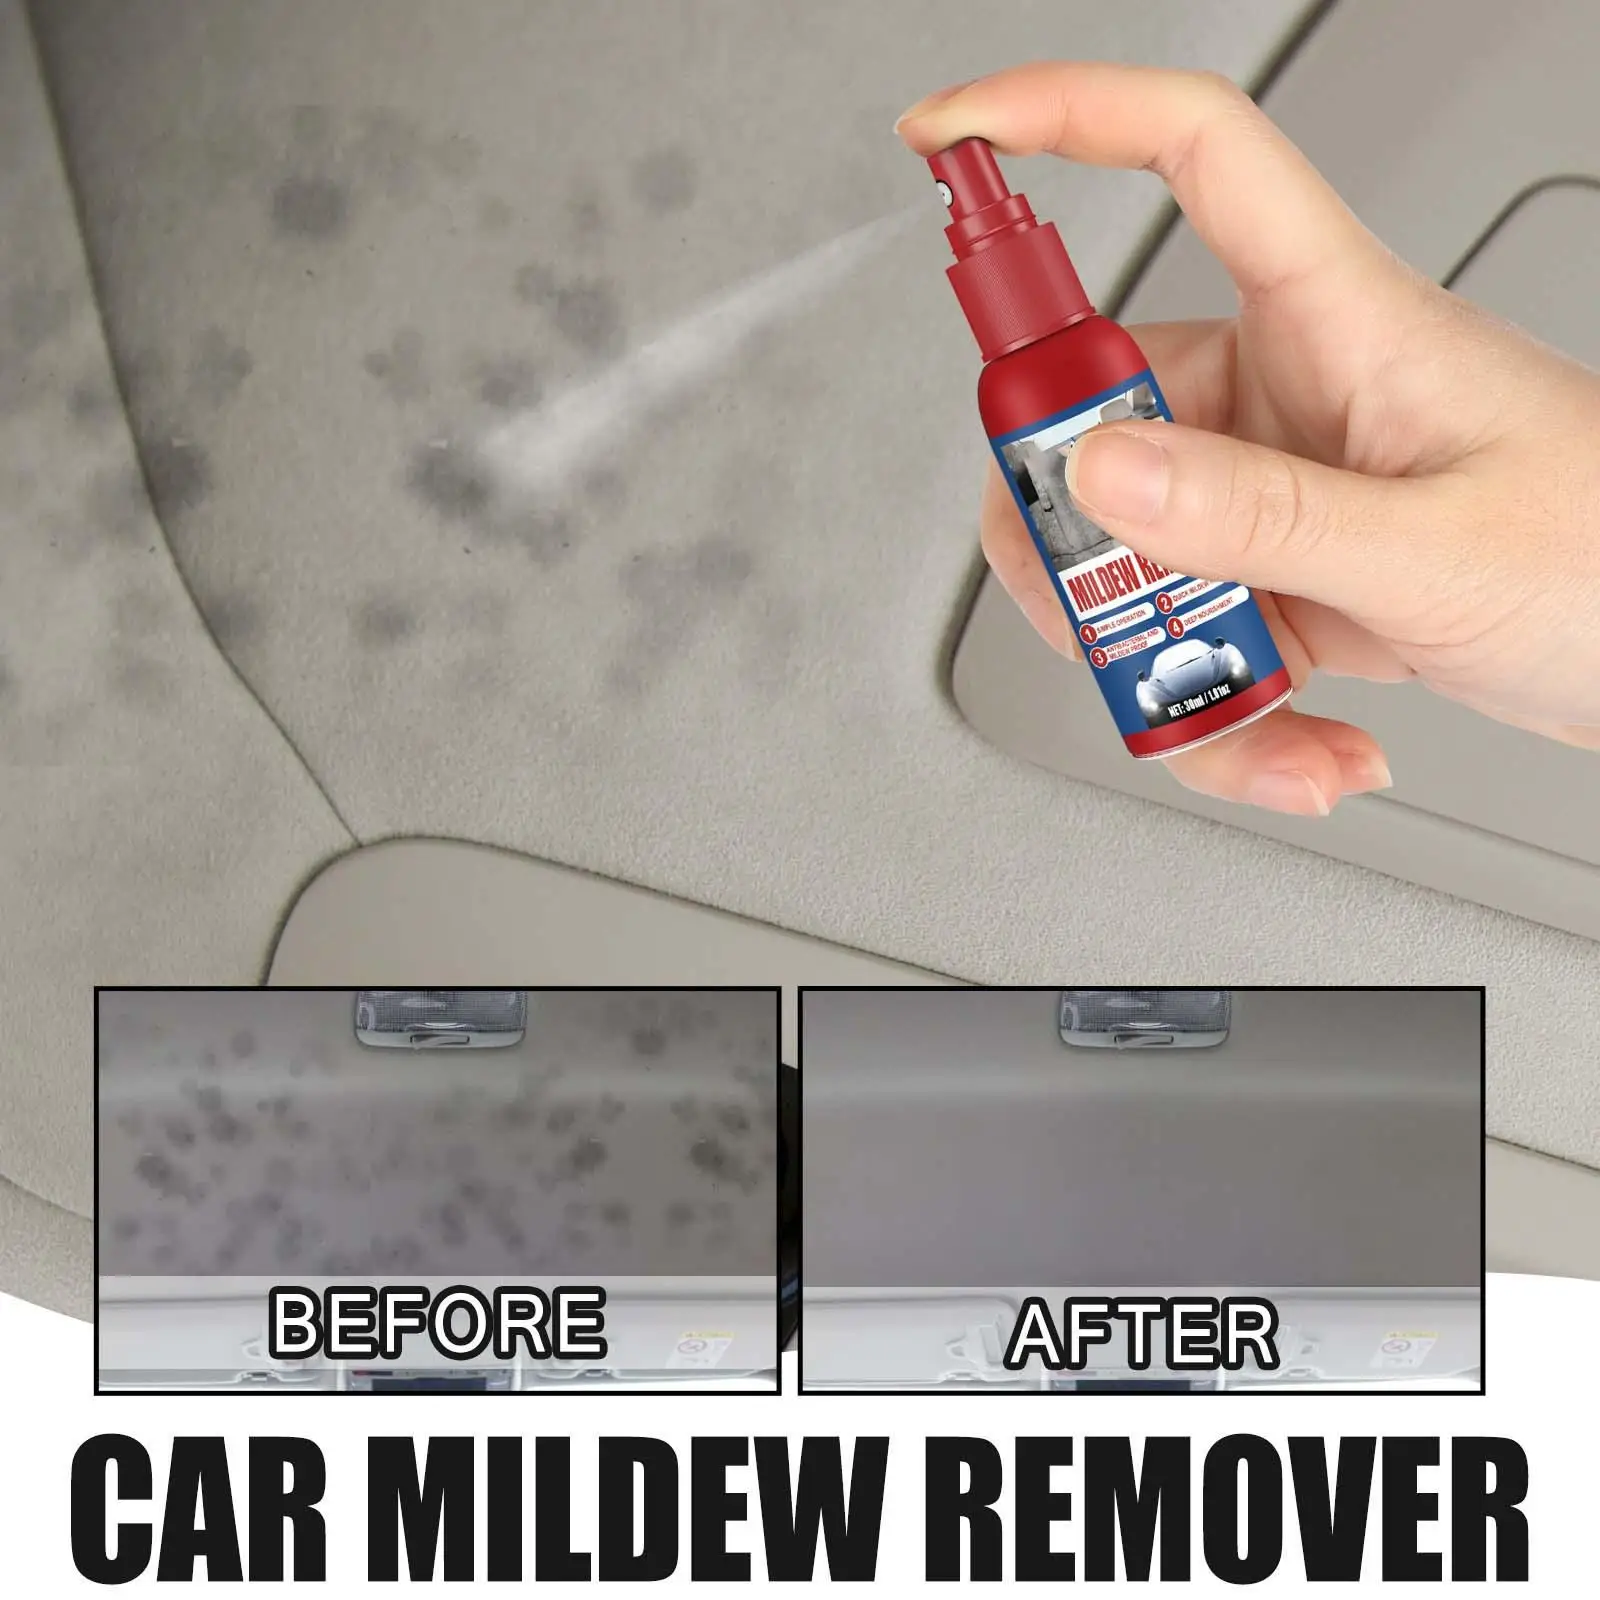 Multi Purpose Car Stain Remover Spray 30ml Effective Spot Cleaning Cleaner for Ceiling Seat Belt Fabric Leather Seat Carpet